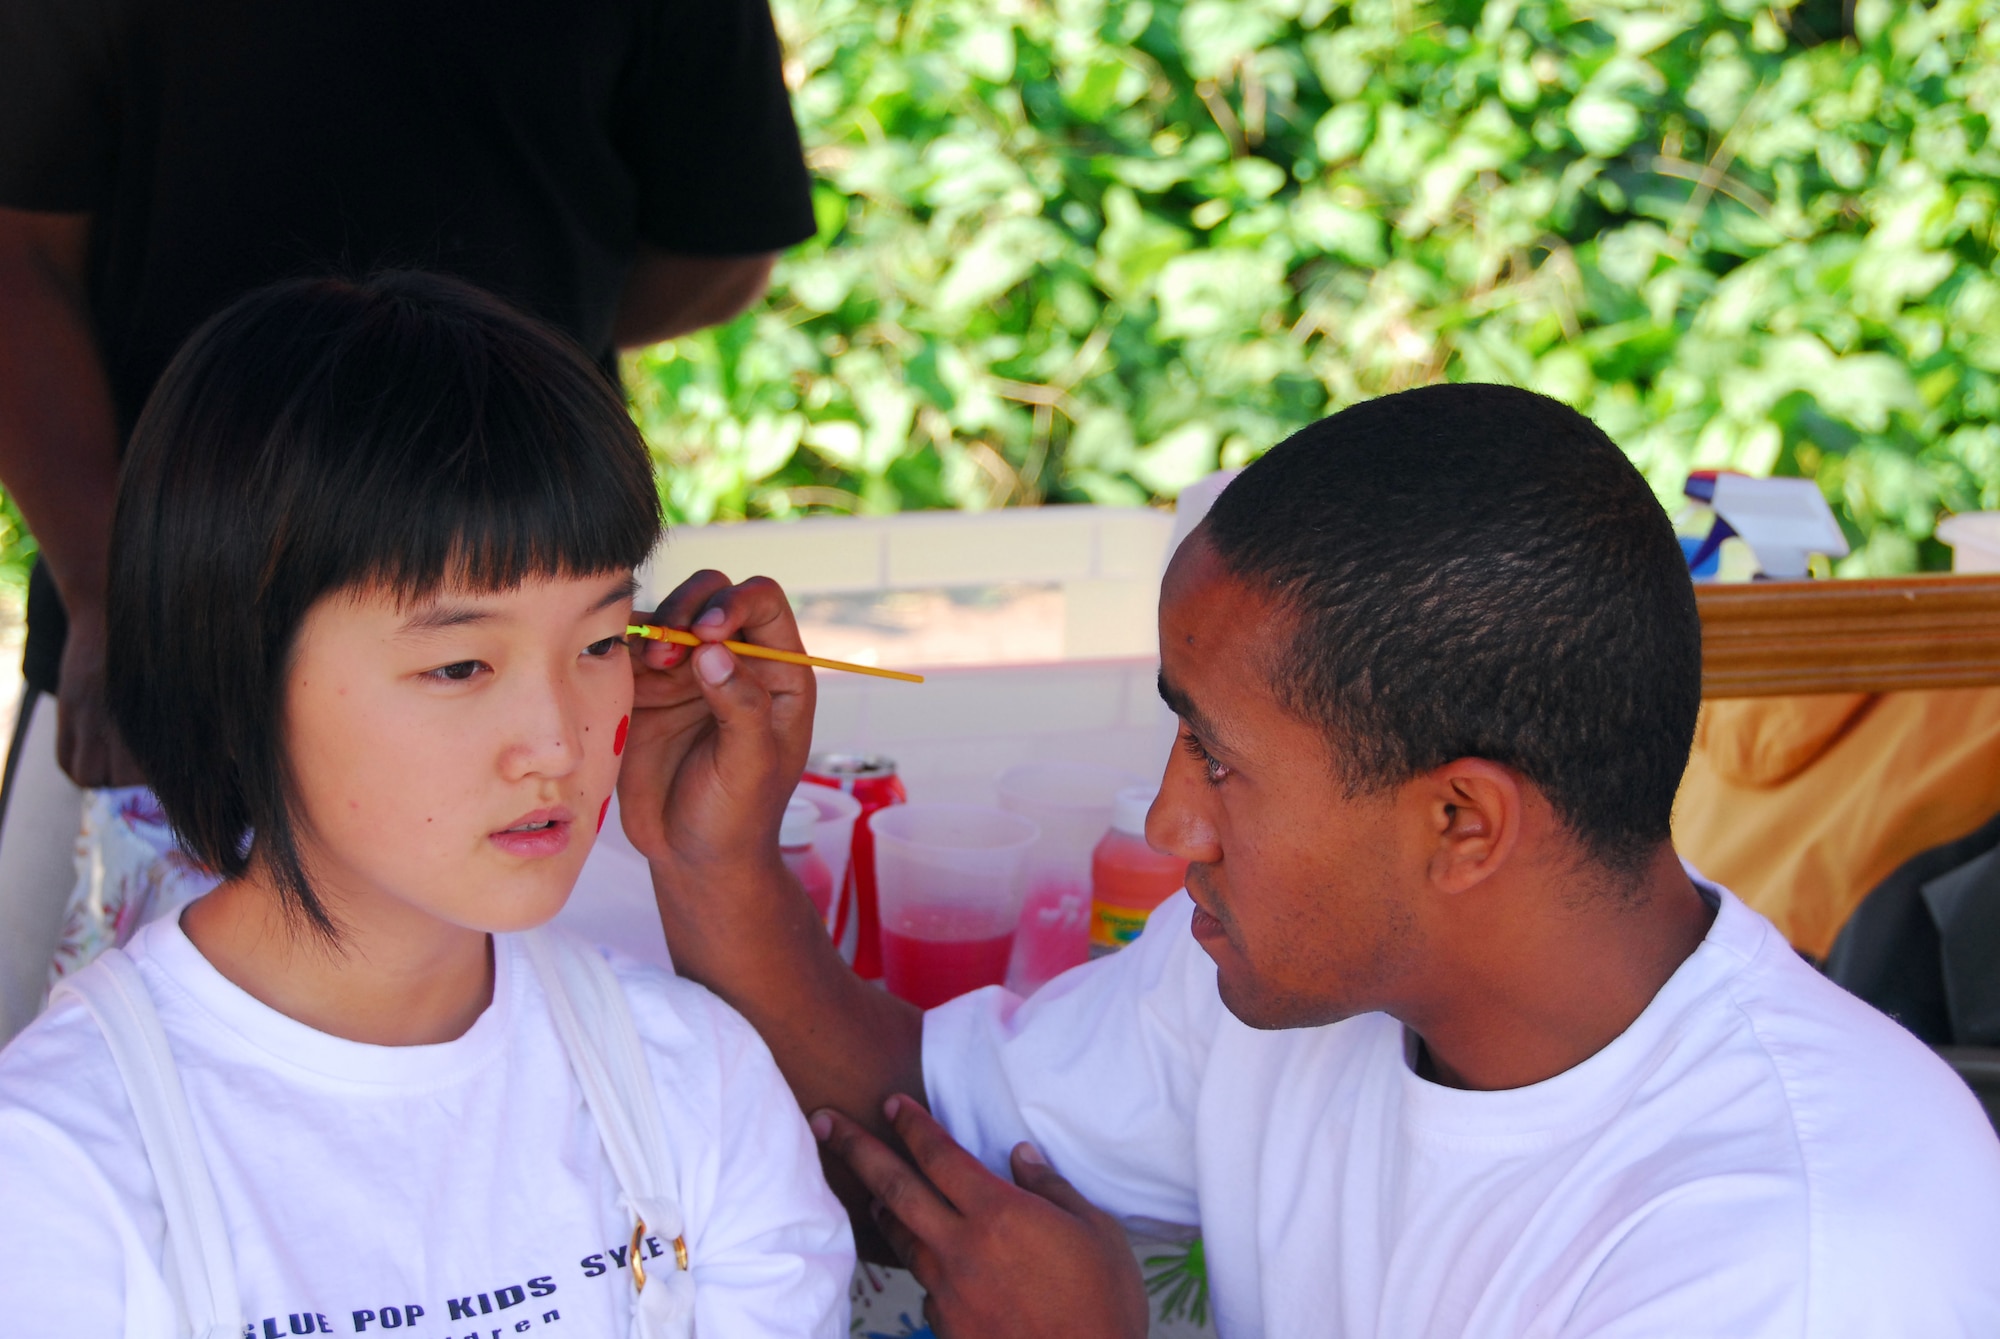 OSAN AIR BASE, Republic of Korea -- Airmen First Class Seth Thompson, 51MUNS, paints the face of a Korean visitor during the Korean/American Friendship Festival on Oct. 15, 2007 (U.S. Air Force photo by Staff Sgt. Ronnie Hill) (Released)